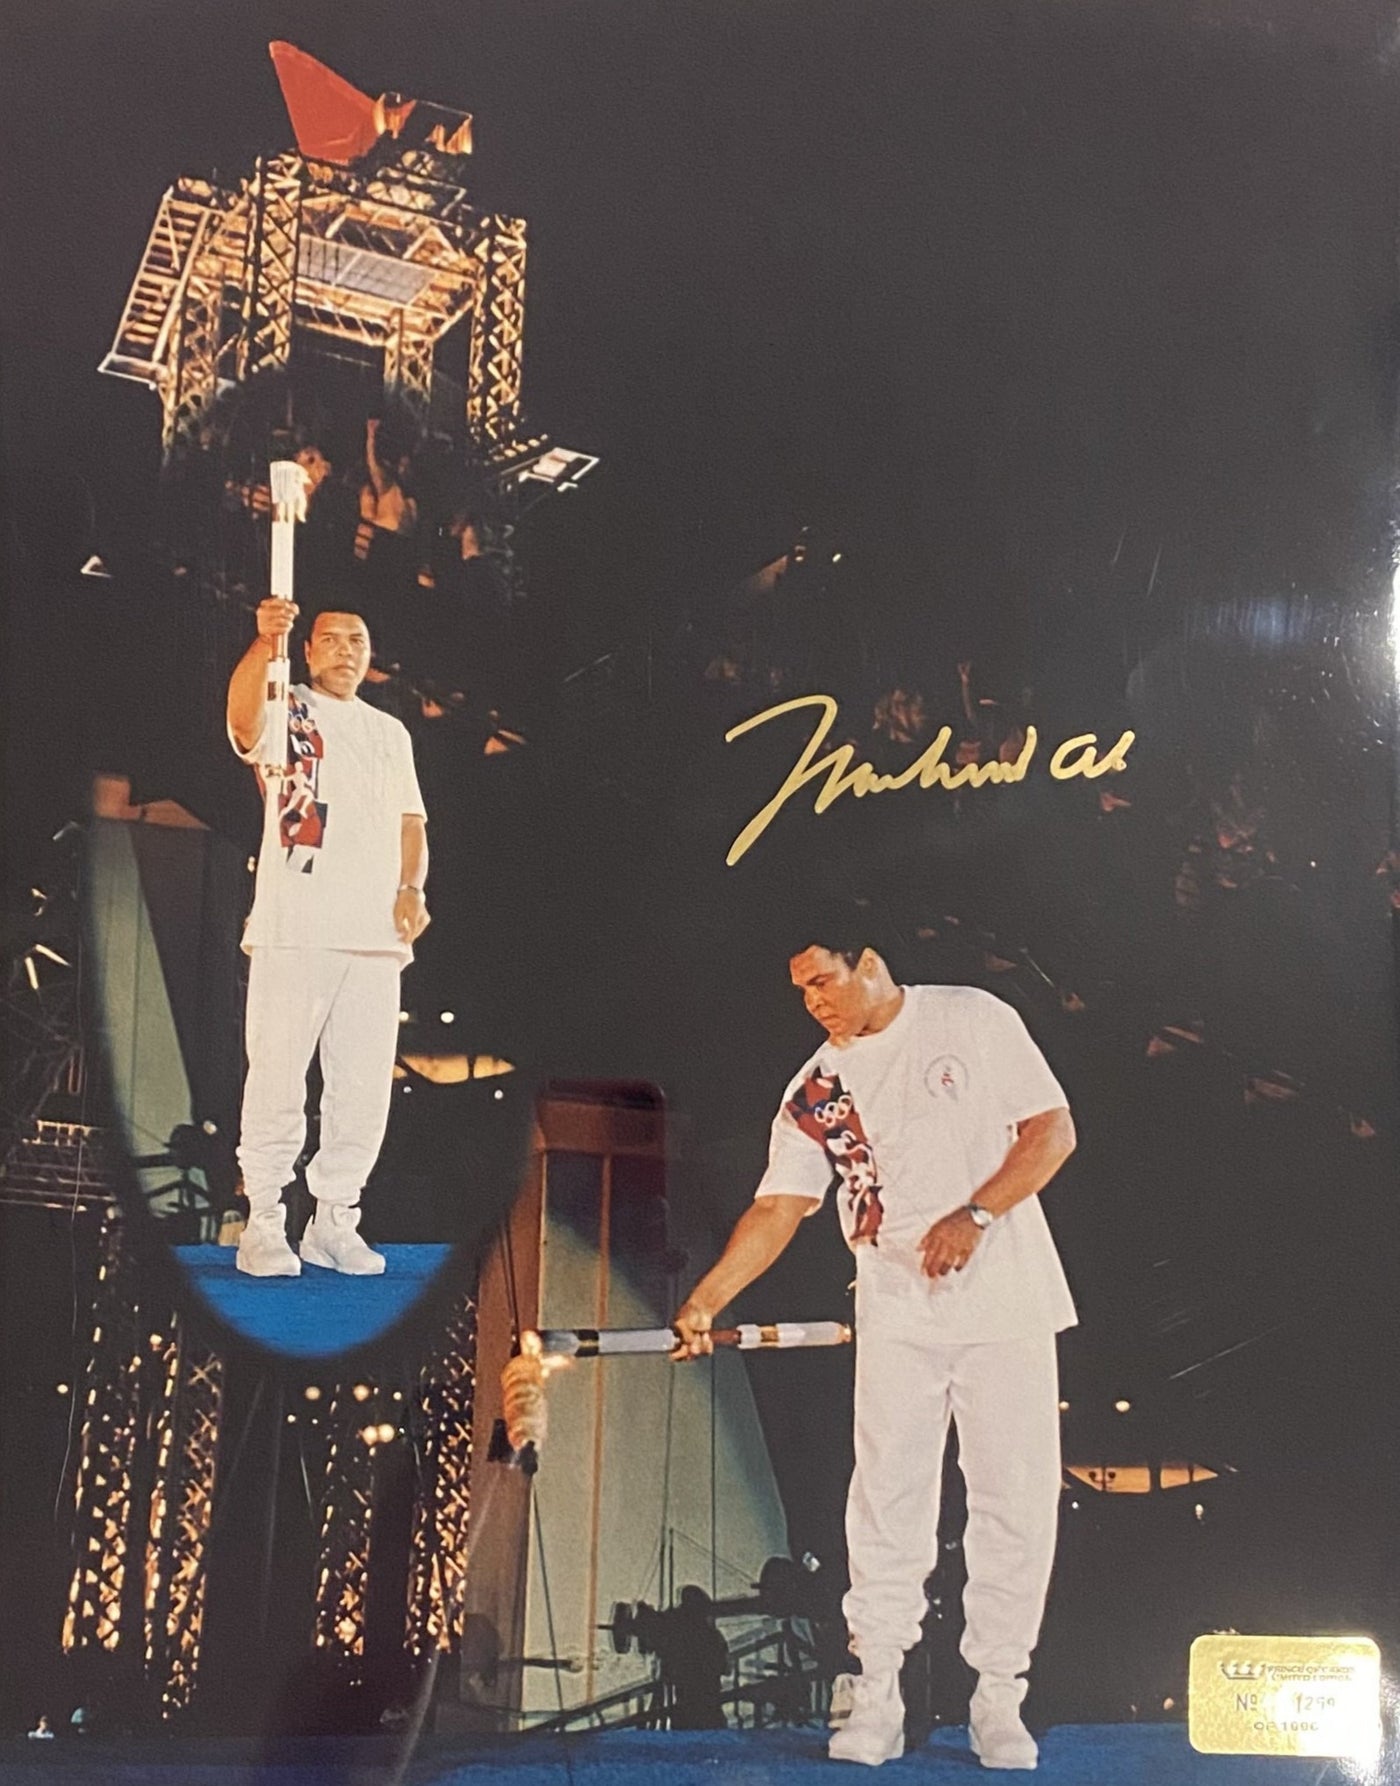 Photograph of Muhammad Ali Lighting 1996 Olympic Torch signed by Muhammad Ali